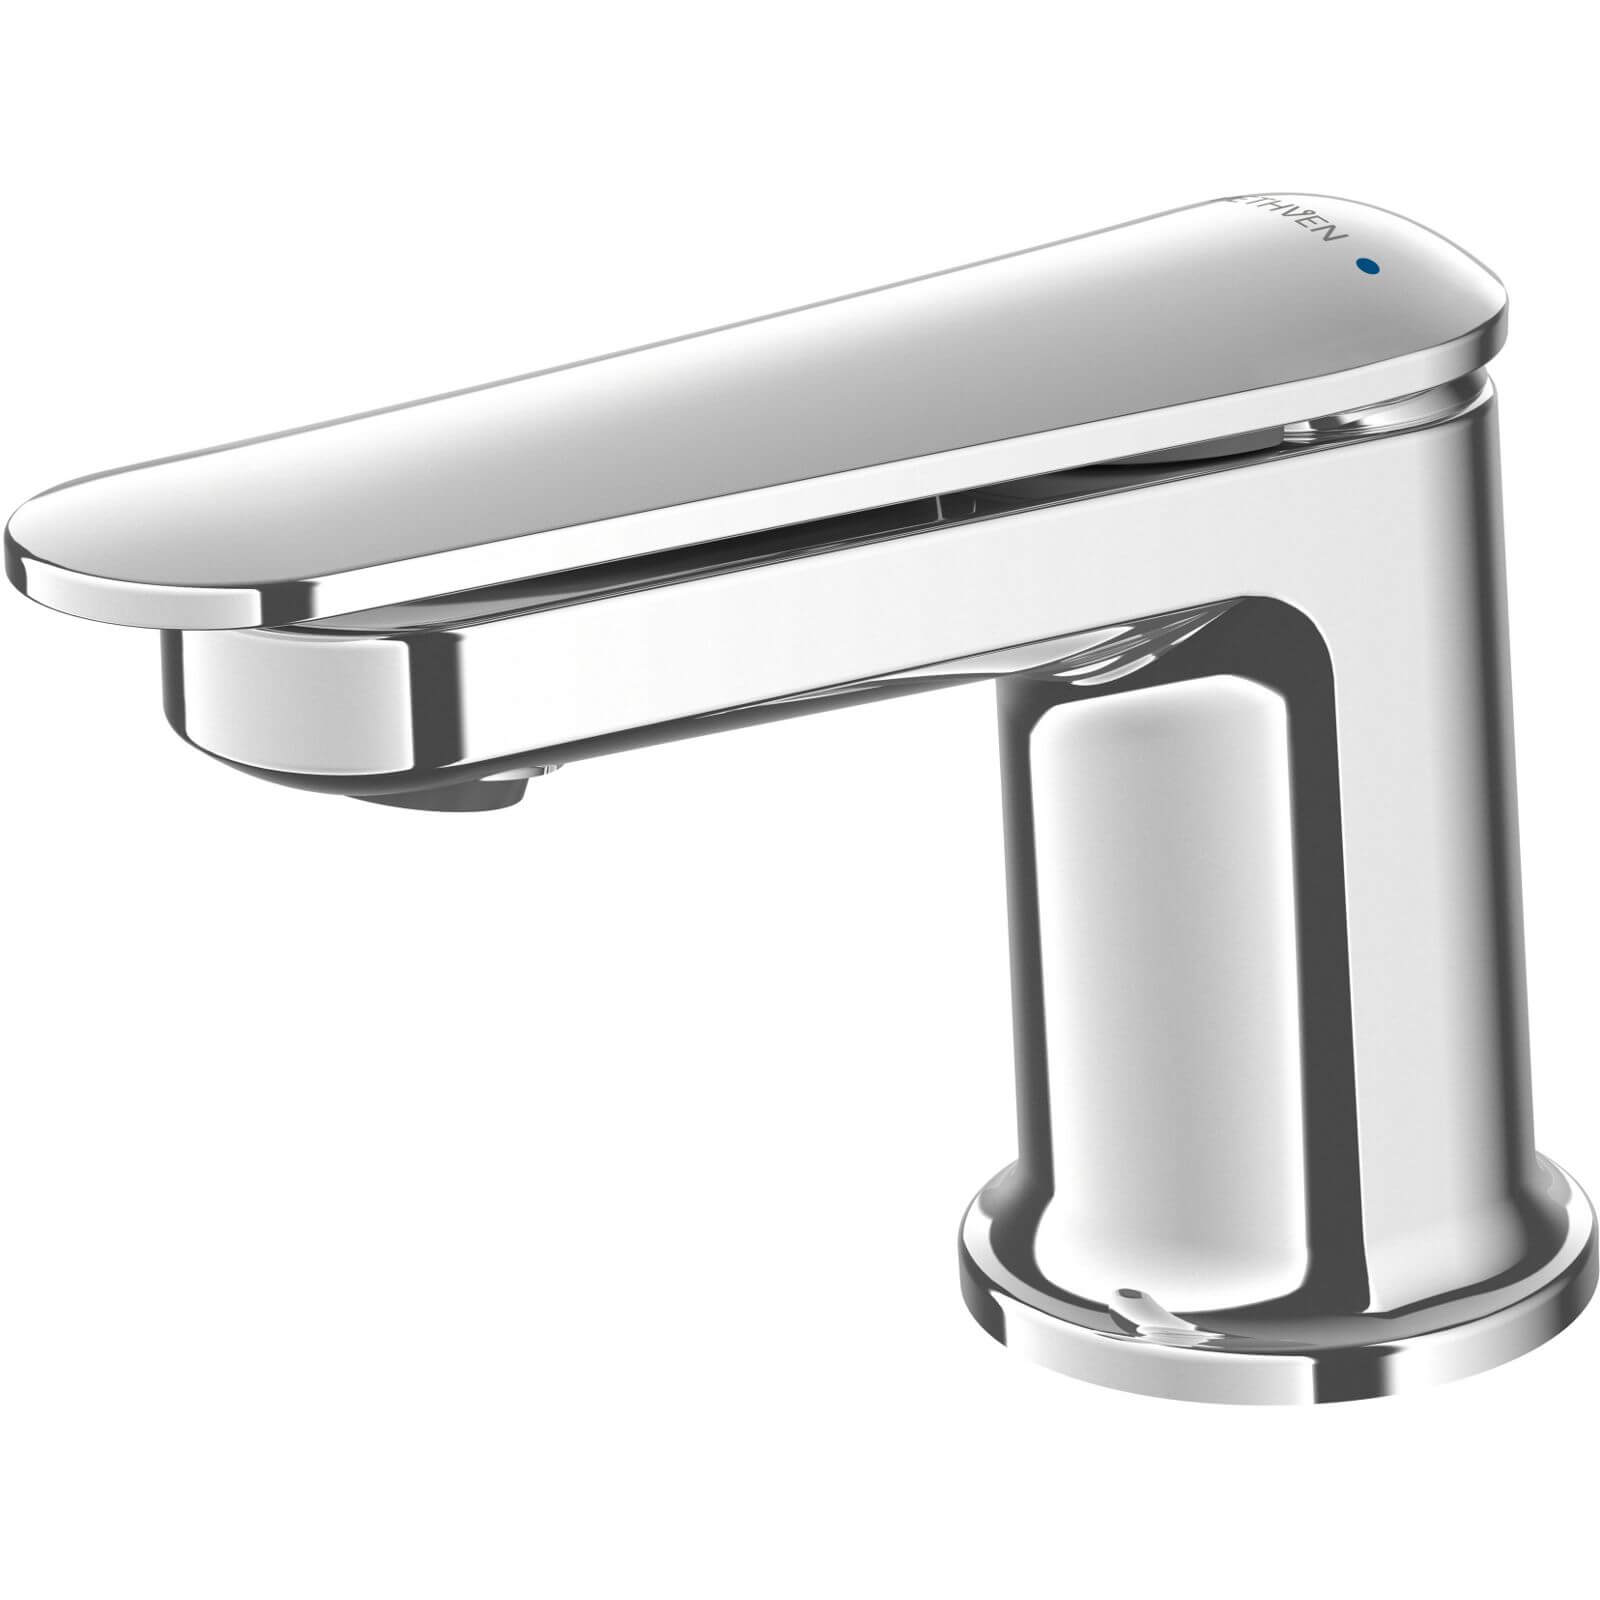 Methven Aio Mini Basin Mixer Tap in Chrome made from Ecobrass